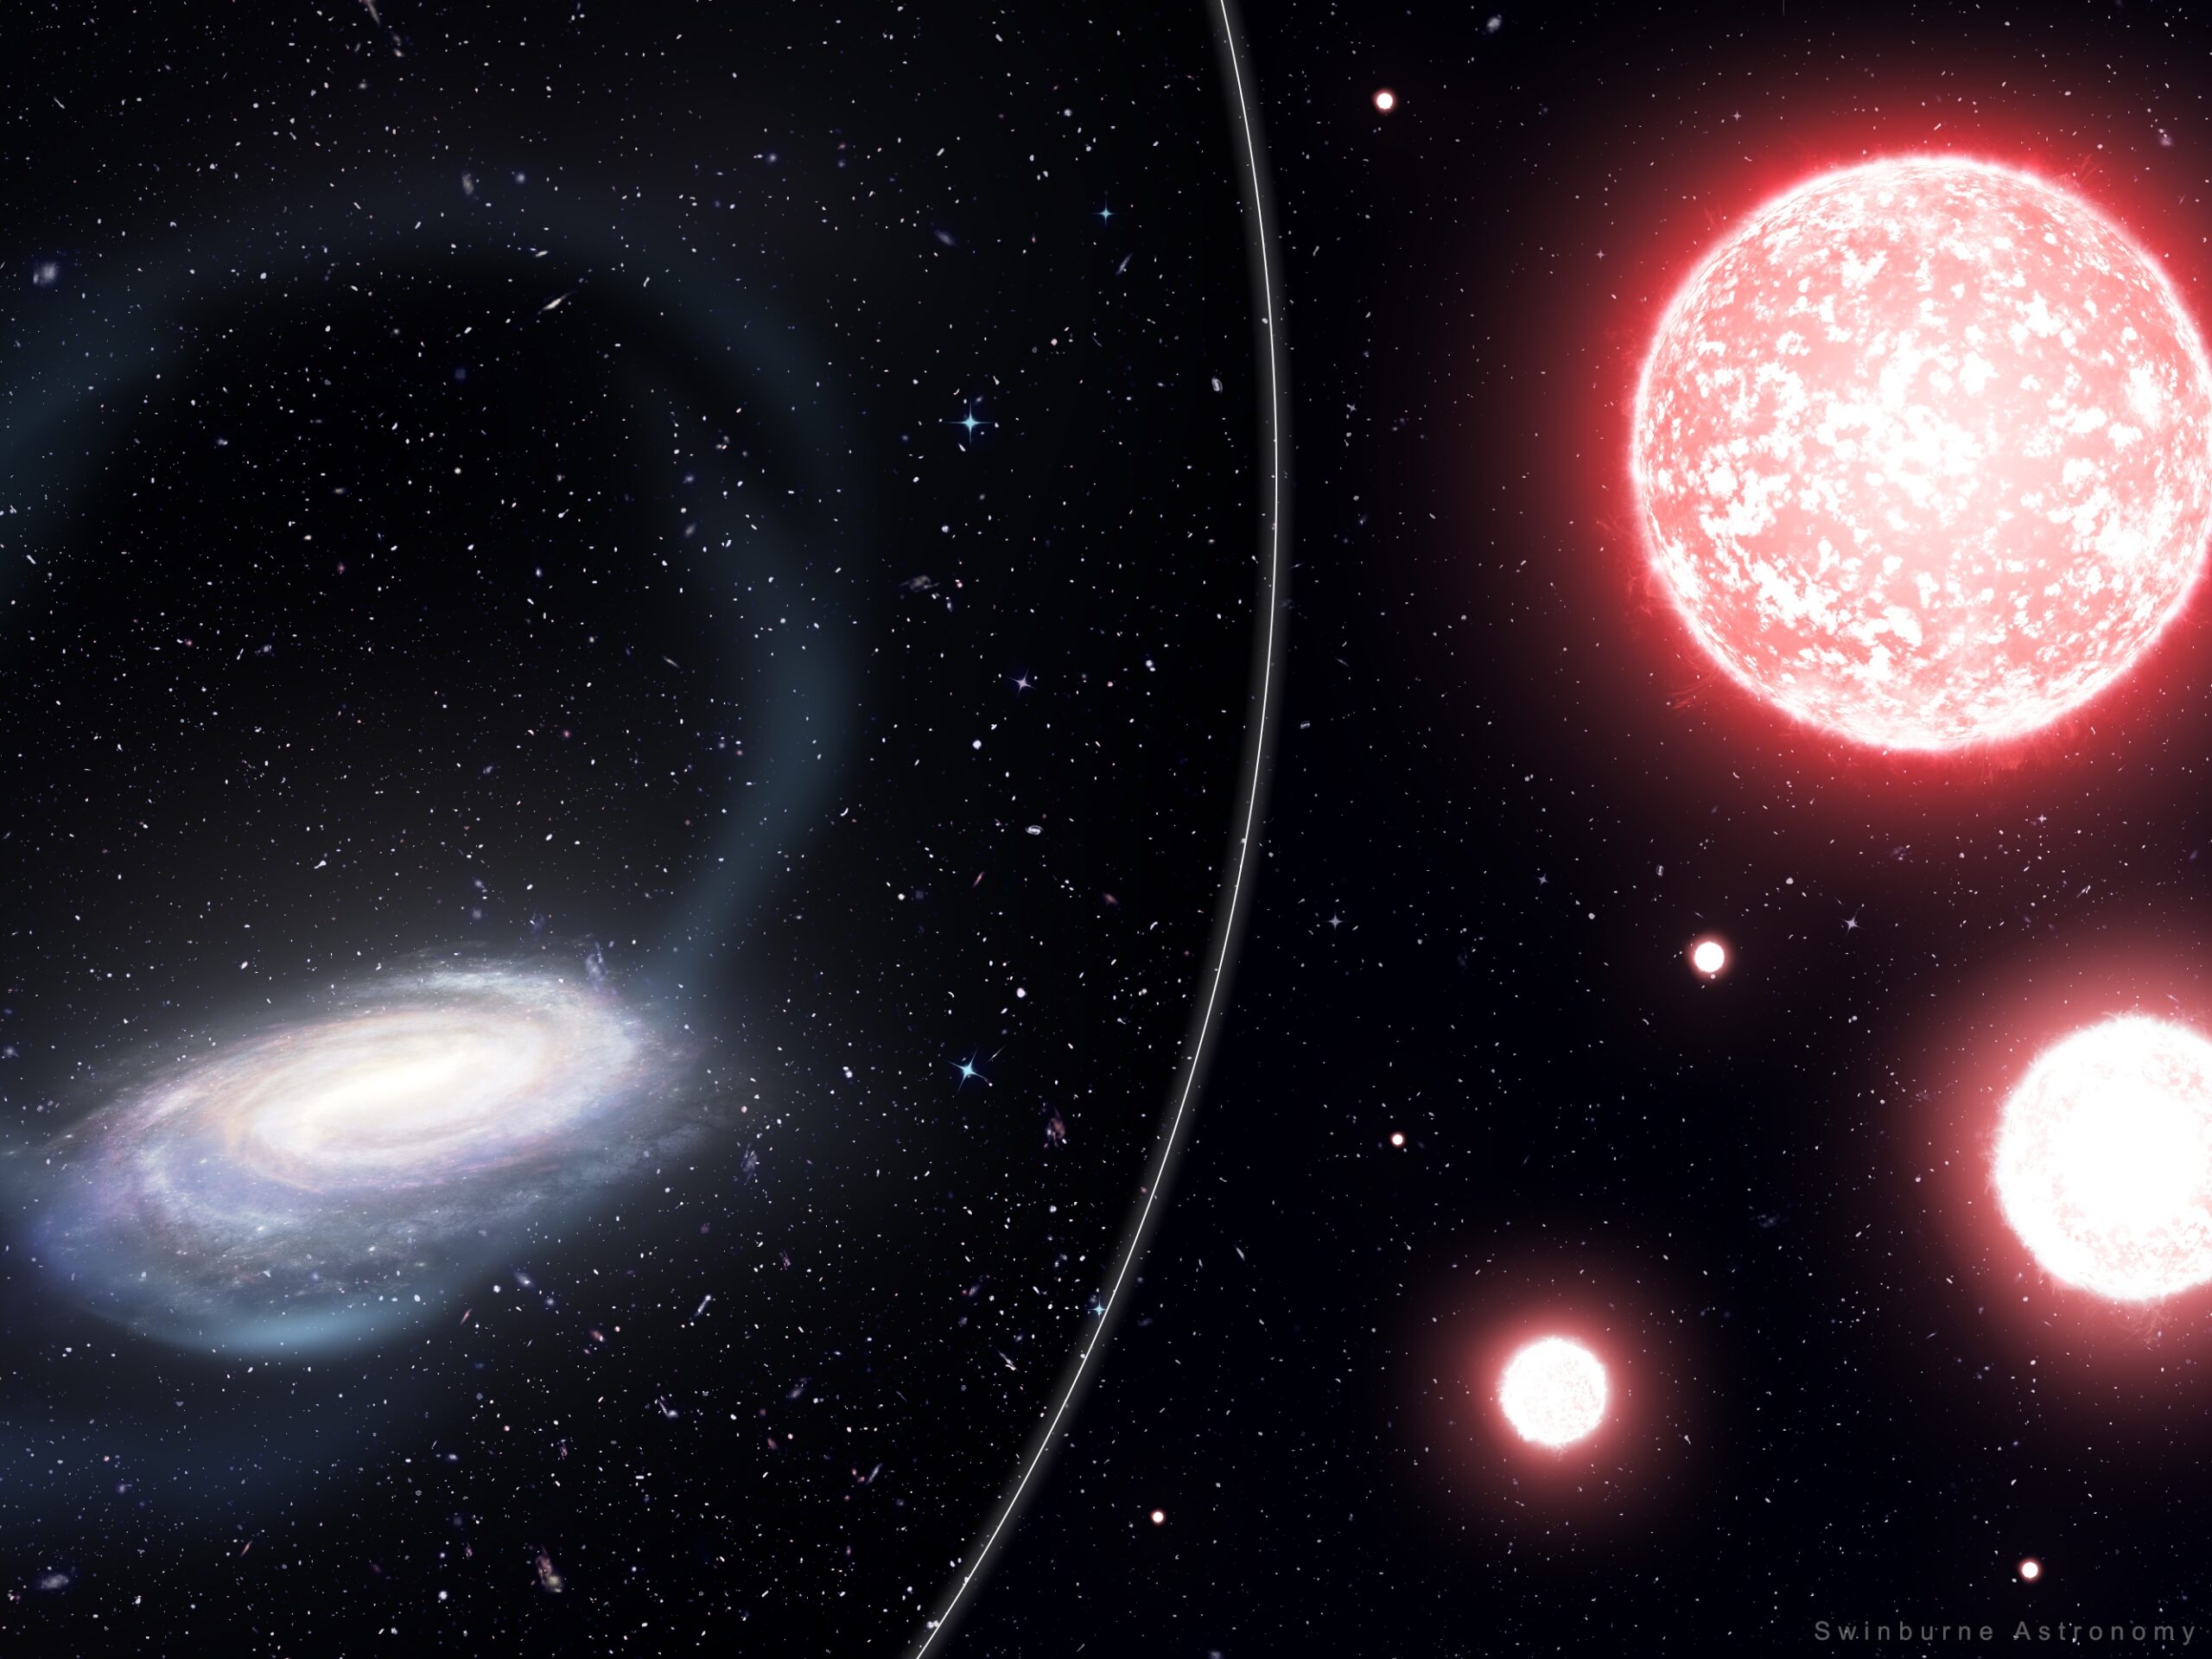 Artist’s impression of the thin stream of stars torn from the Phoenix globular cluster, wrapping around the Milky Way (left). Astronomers targeted bright red giant stars (artist’s impression, right) to measure the chemical composition of the disrupted Phoenix globular cluster.